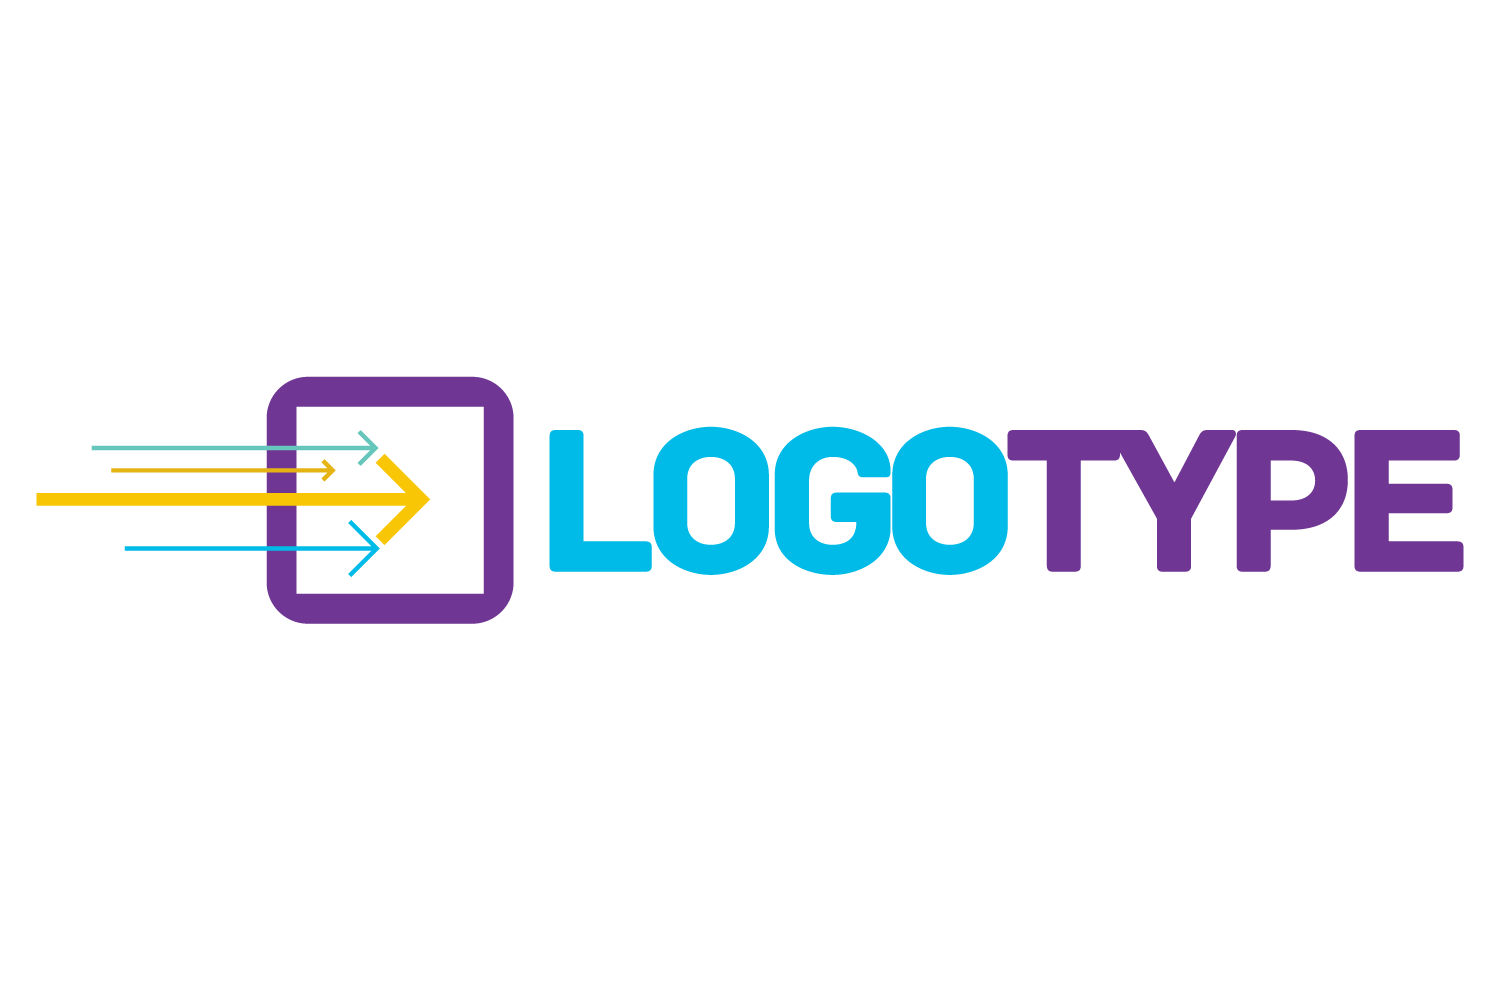 Your Company Logo - Logo: How important it is?